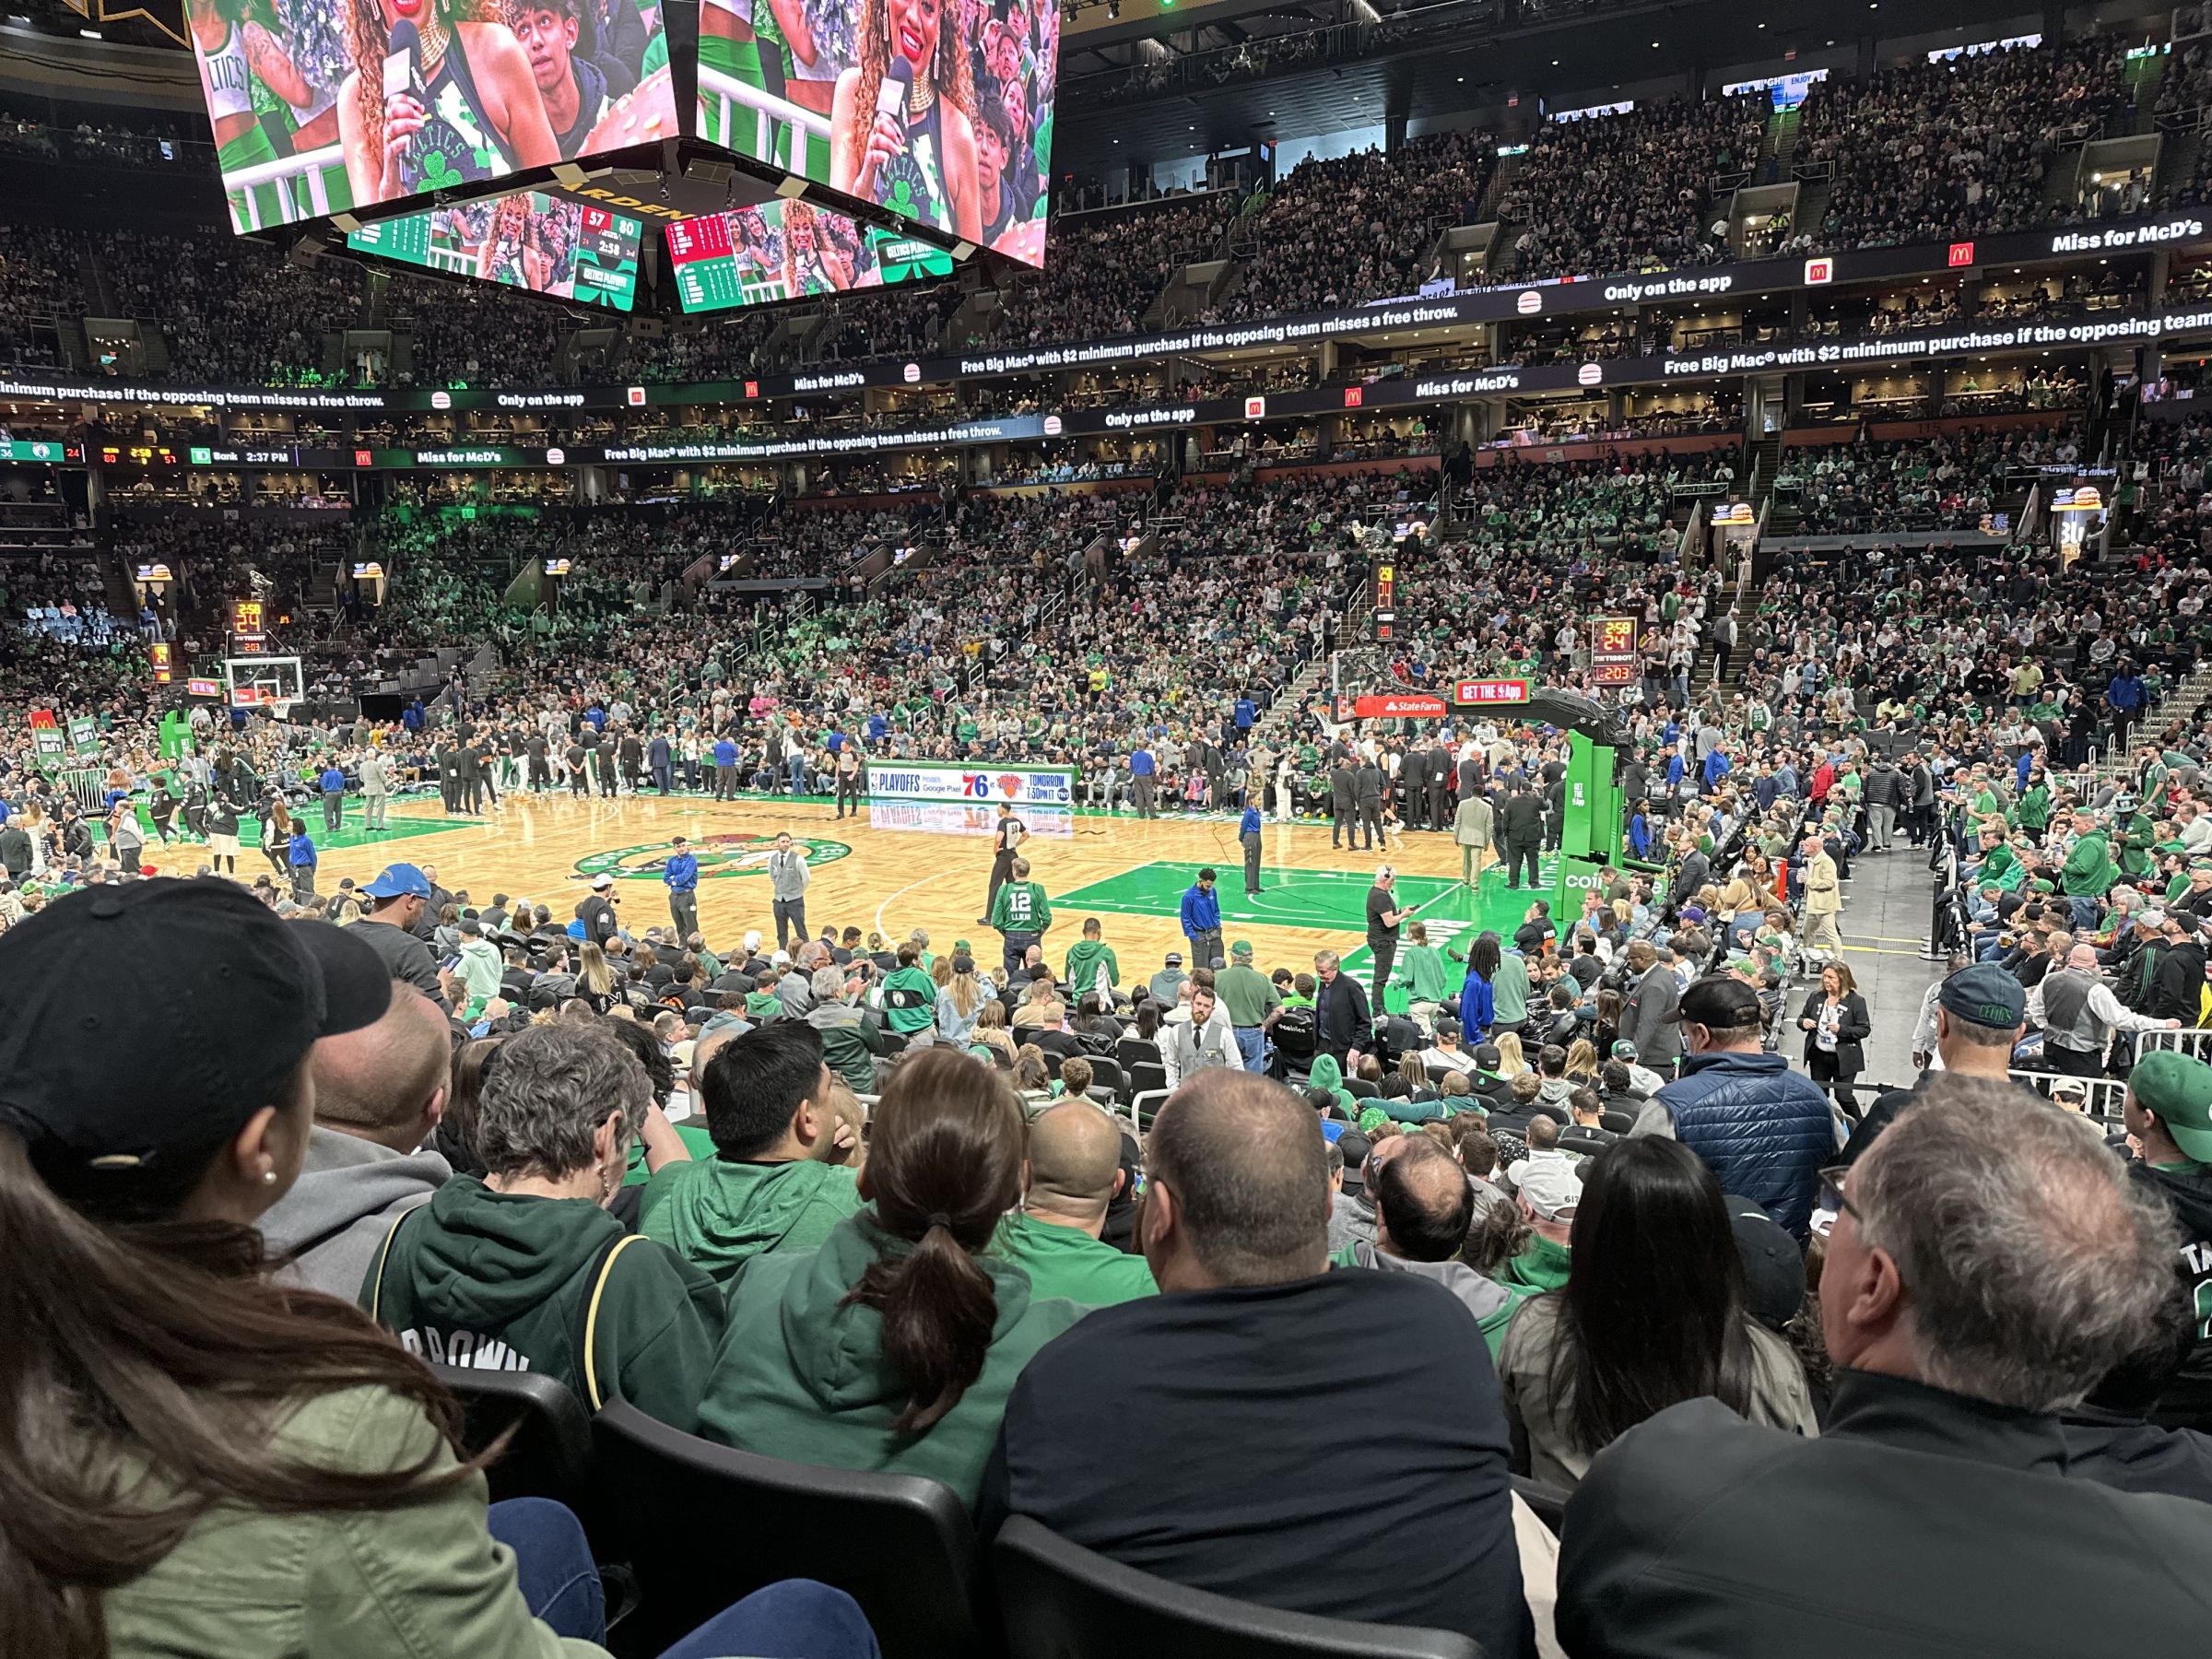 loge 10, row 13 seat view  for basketball - td garden